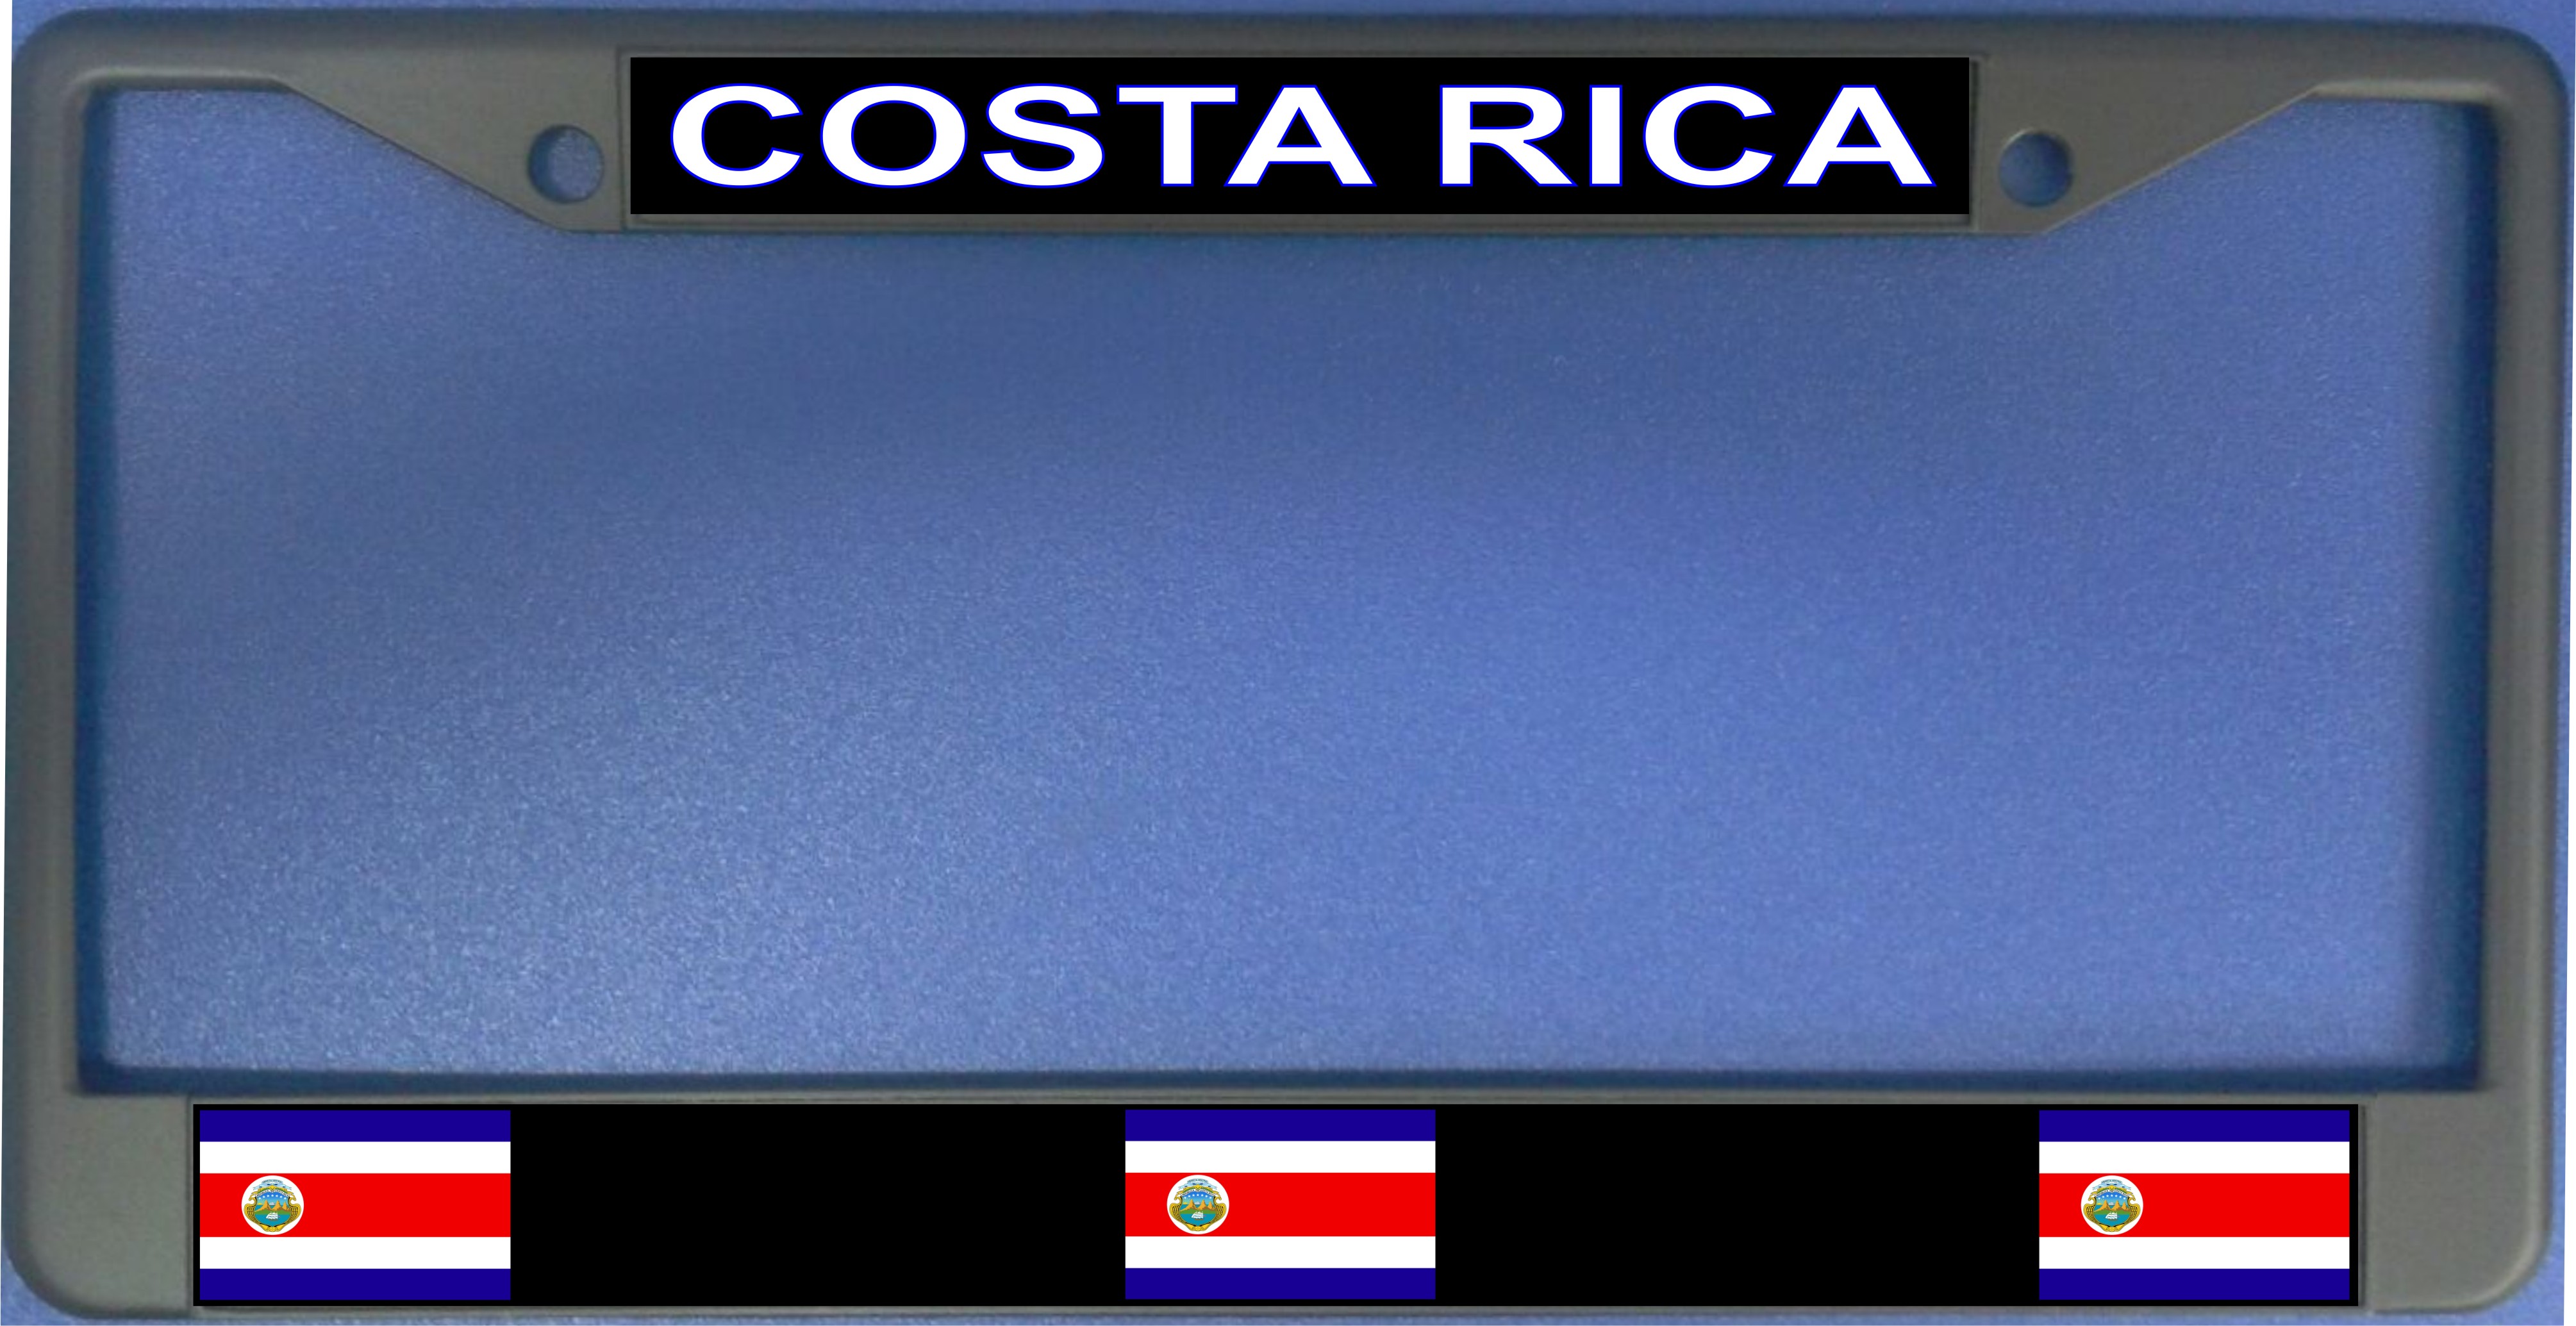 Costa Rica Flag Photo License Plate Frame  Free SCREW Caps with this Frame